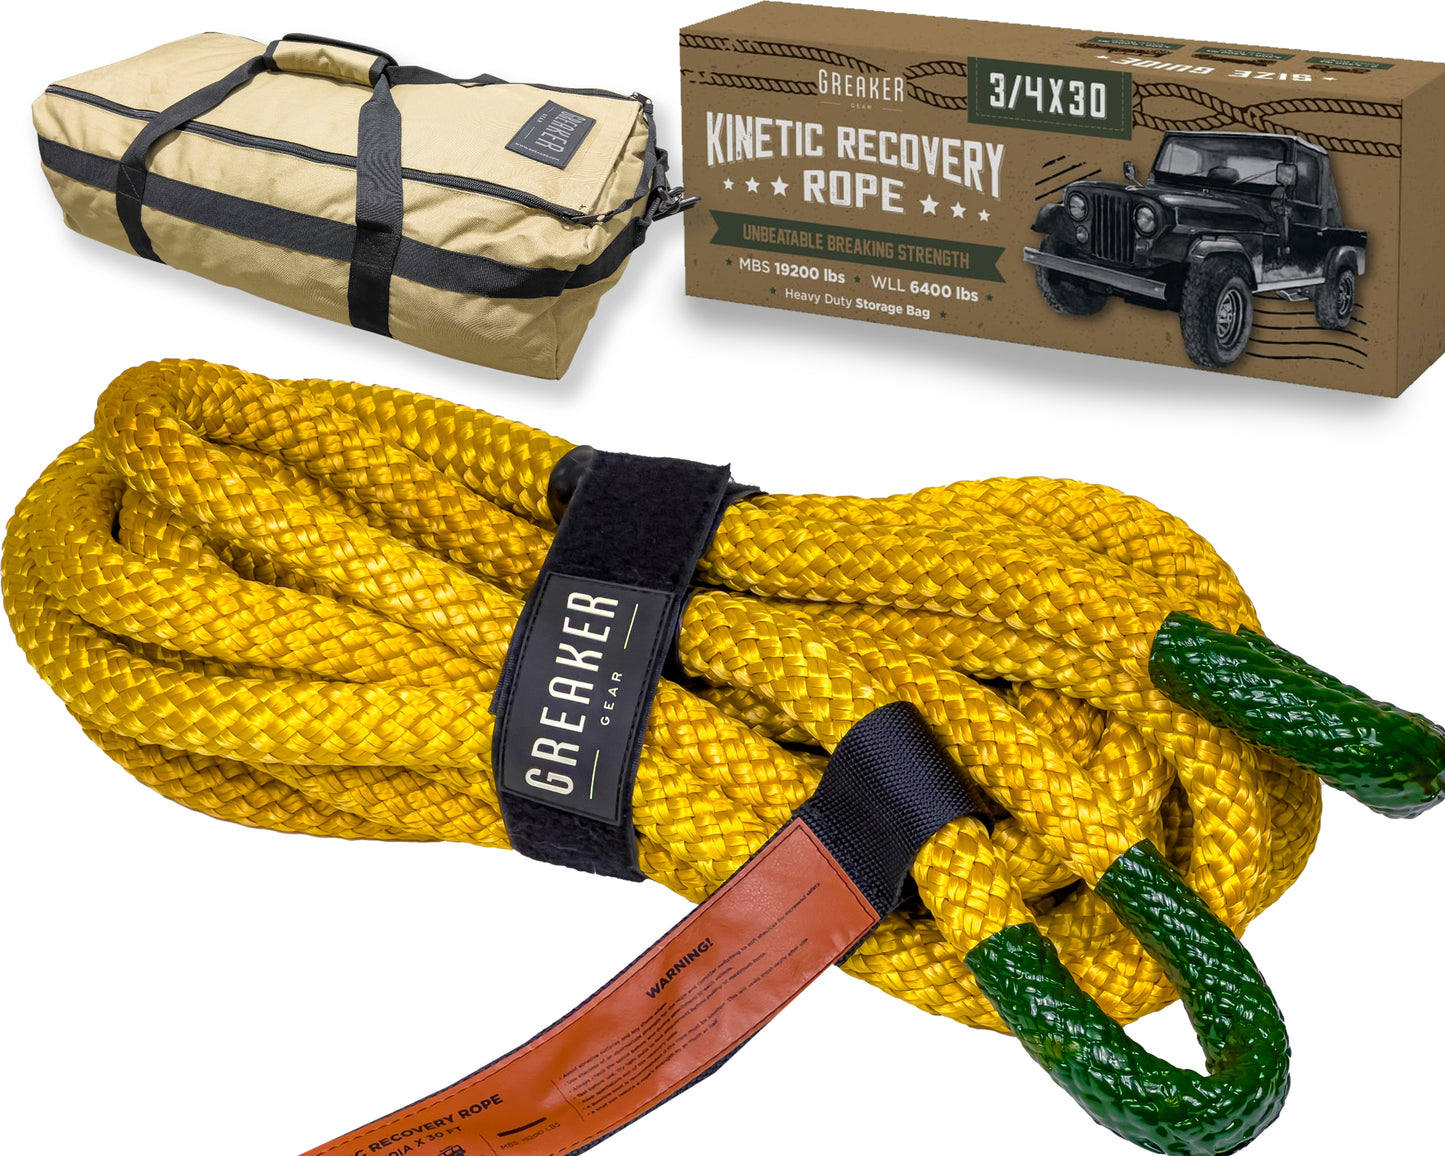 Greaker Limited Edition Kinetic Recovery Tow Rope Heavy Duty Offroad - Estilo único 4x4 (Gold Sahara, 3/4" x30')